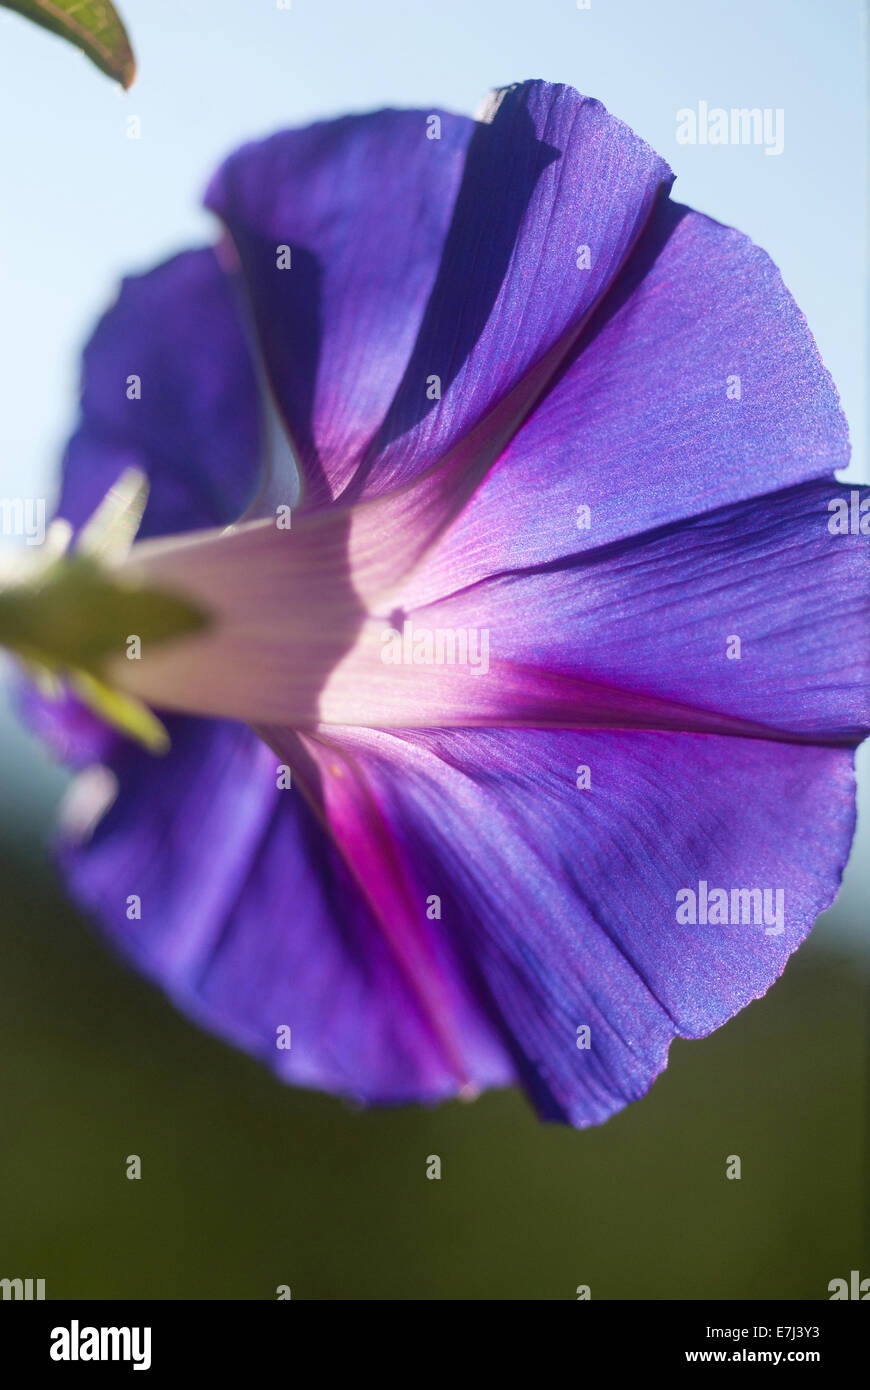 Ipomoea / Morning glory flower back lit by the sun Stock Photo